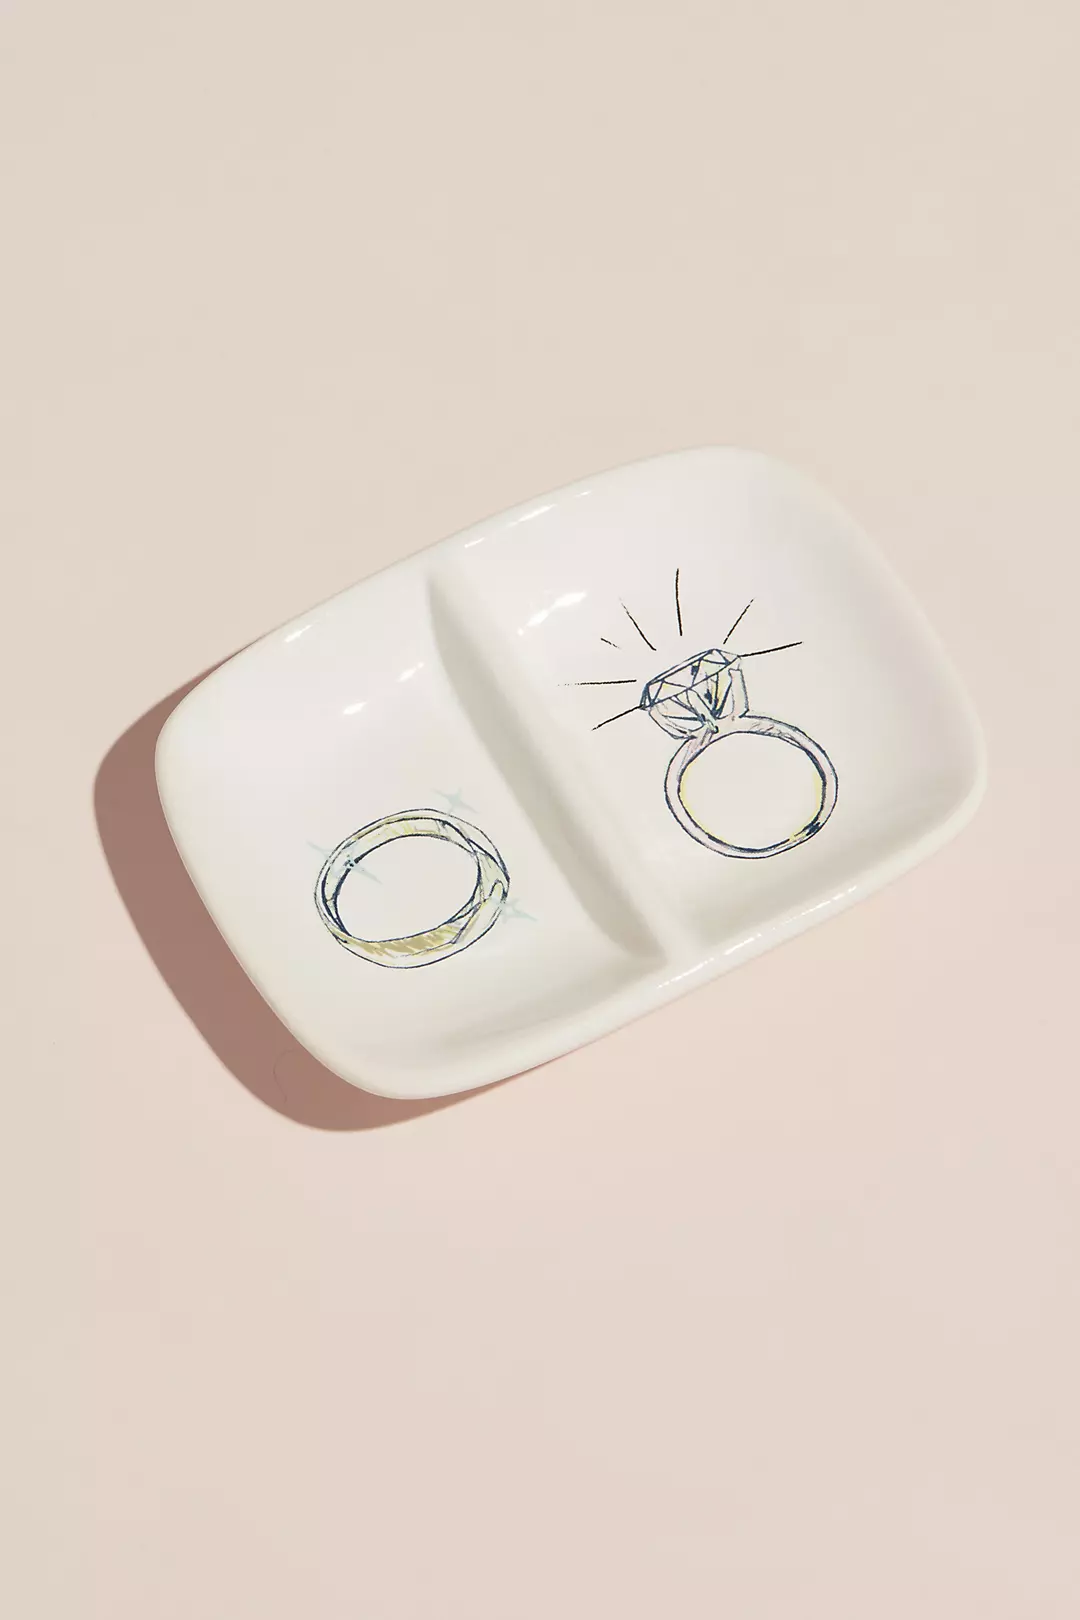 Ceramic His and Hers Wedding Ring Dish Image